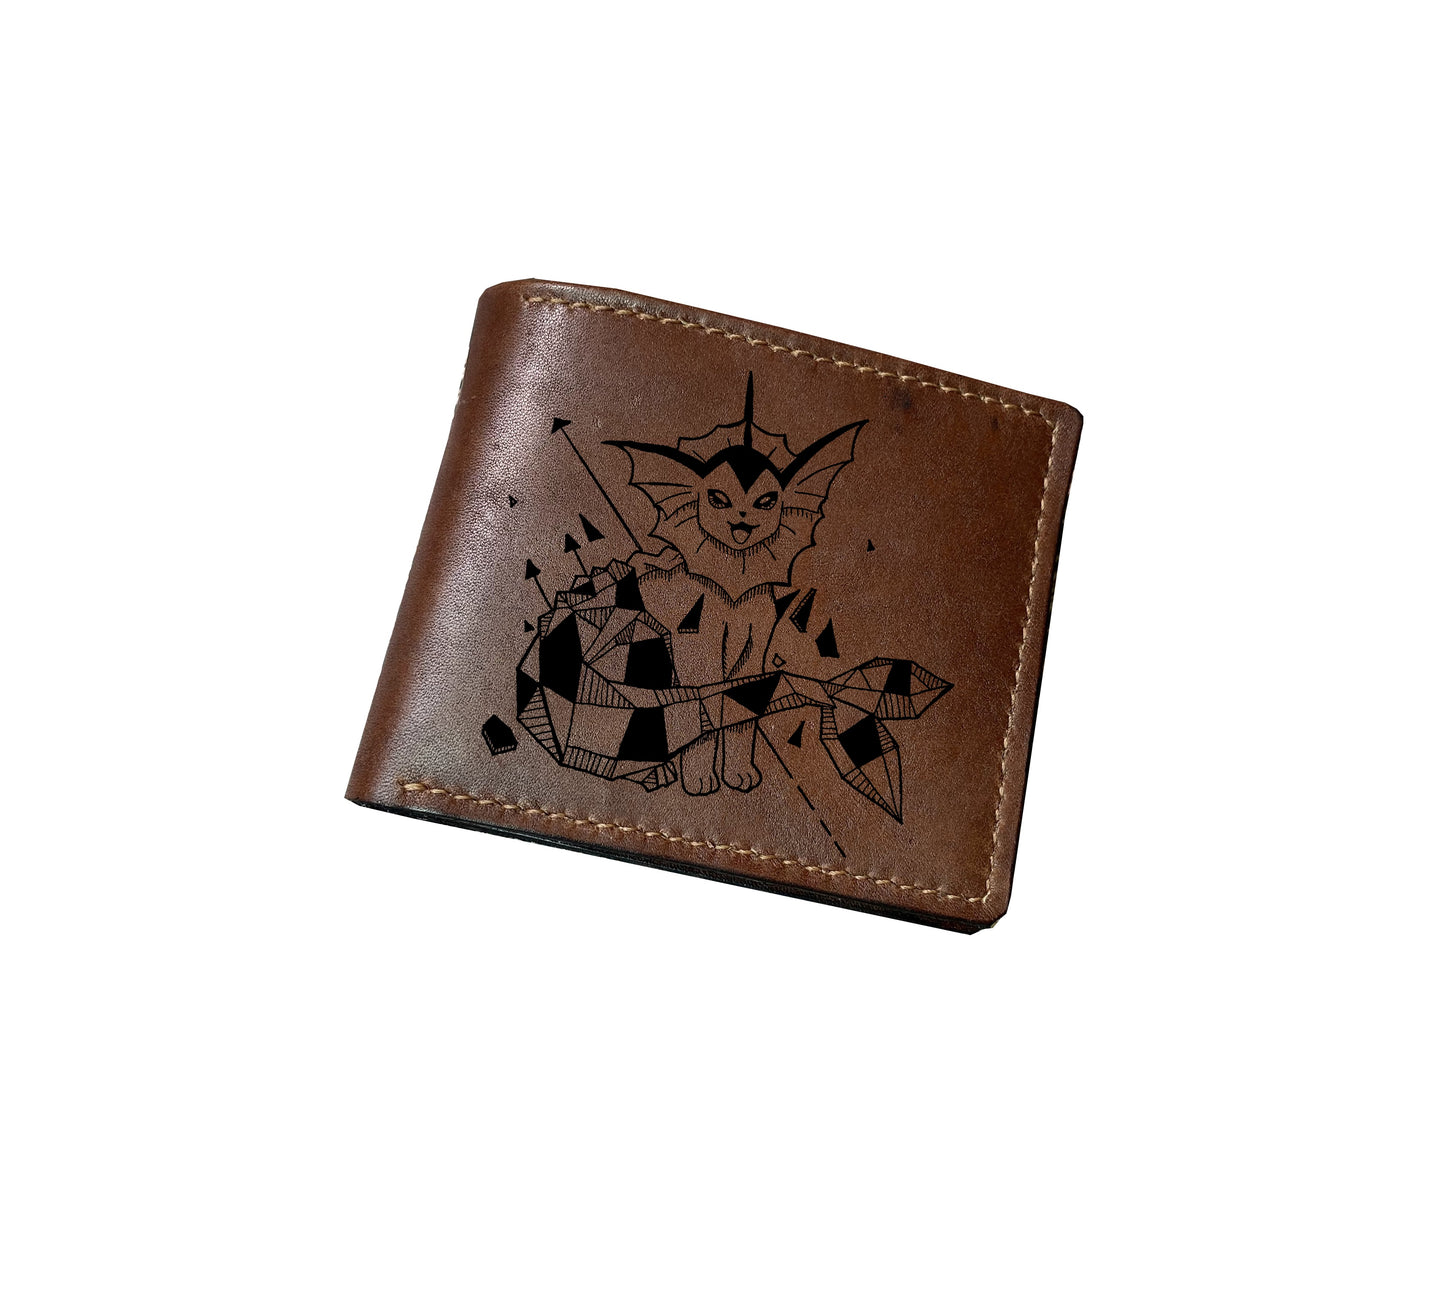 Mayan Corner - Pokemon geometric art leather handmade wallet, leather gift for dad, husband, brother - Mewtwo